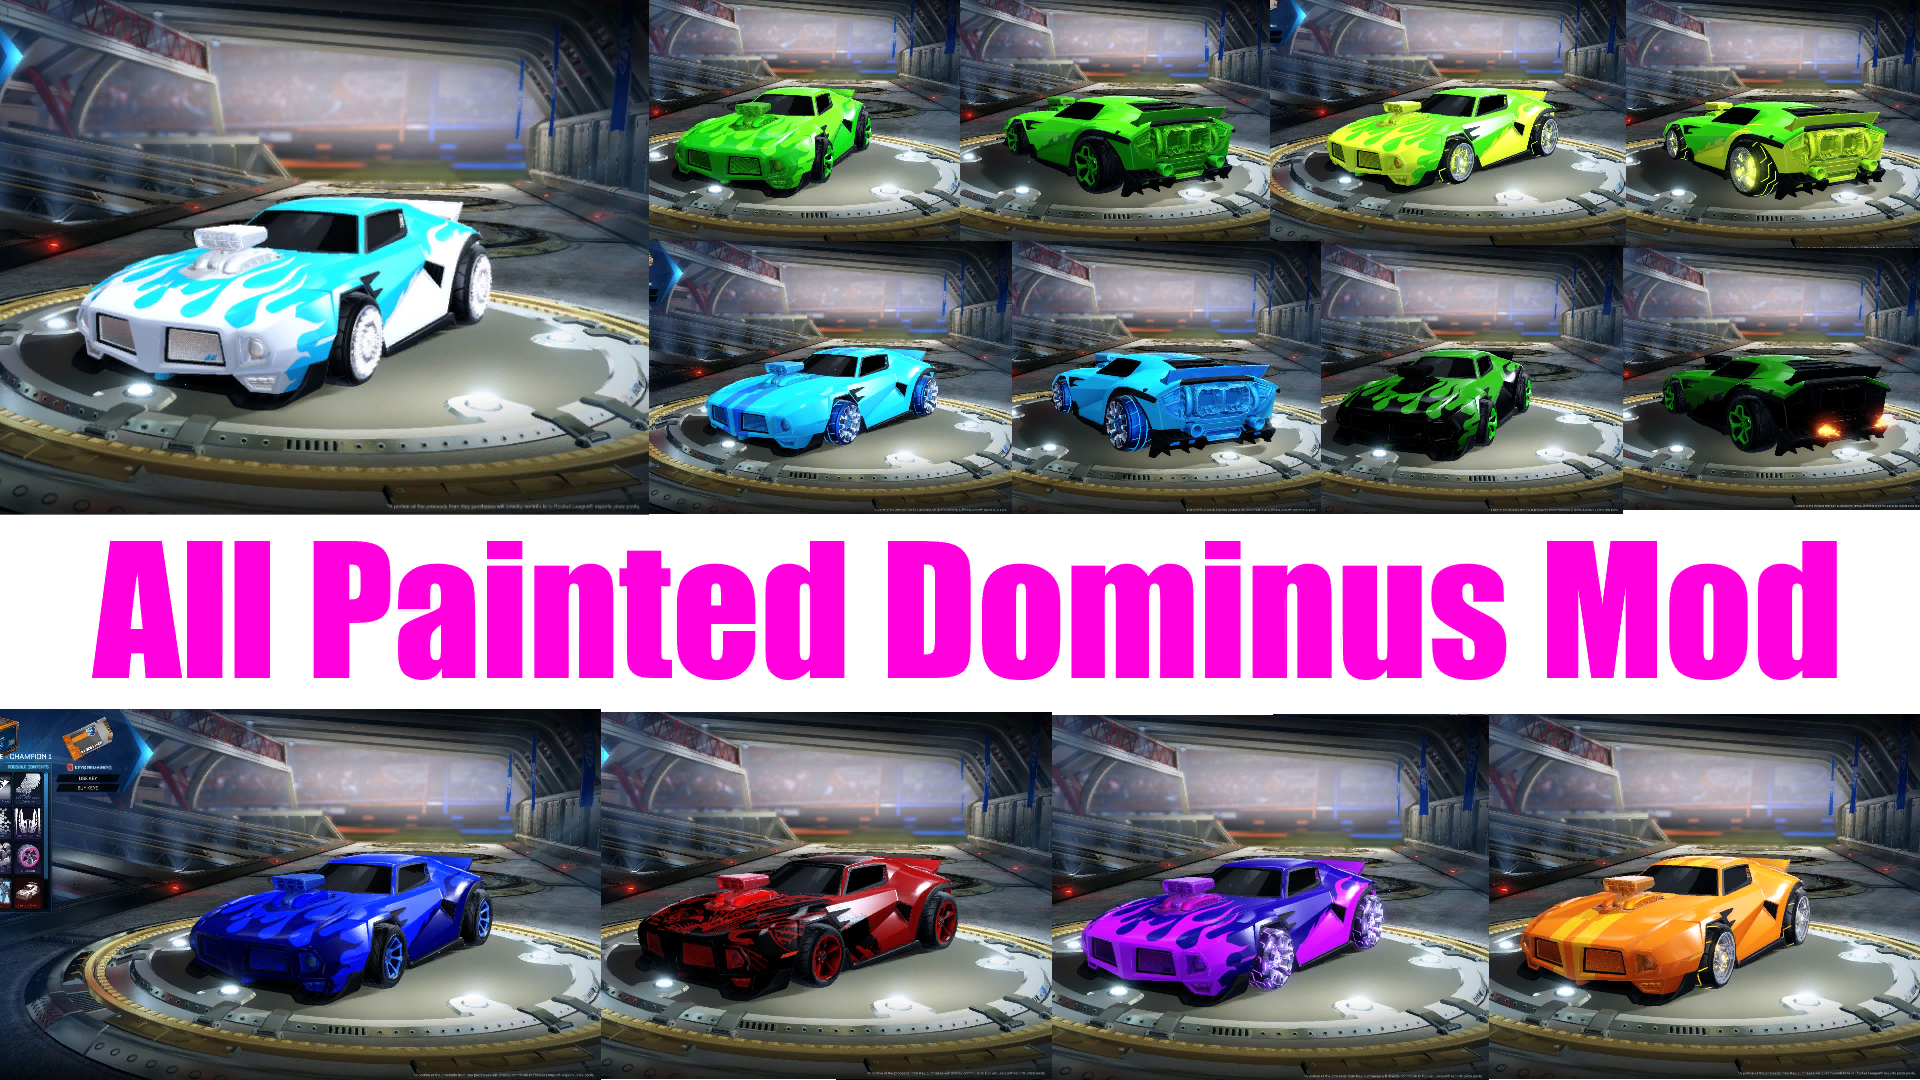 PAINTED DOMINUS GT’s! ALL PAINTS/COLORS IN 1 MOD!